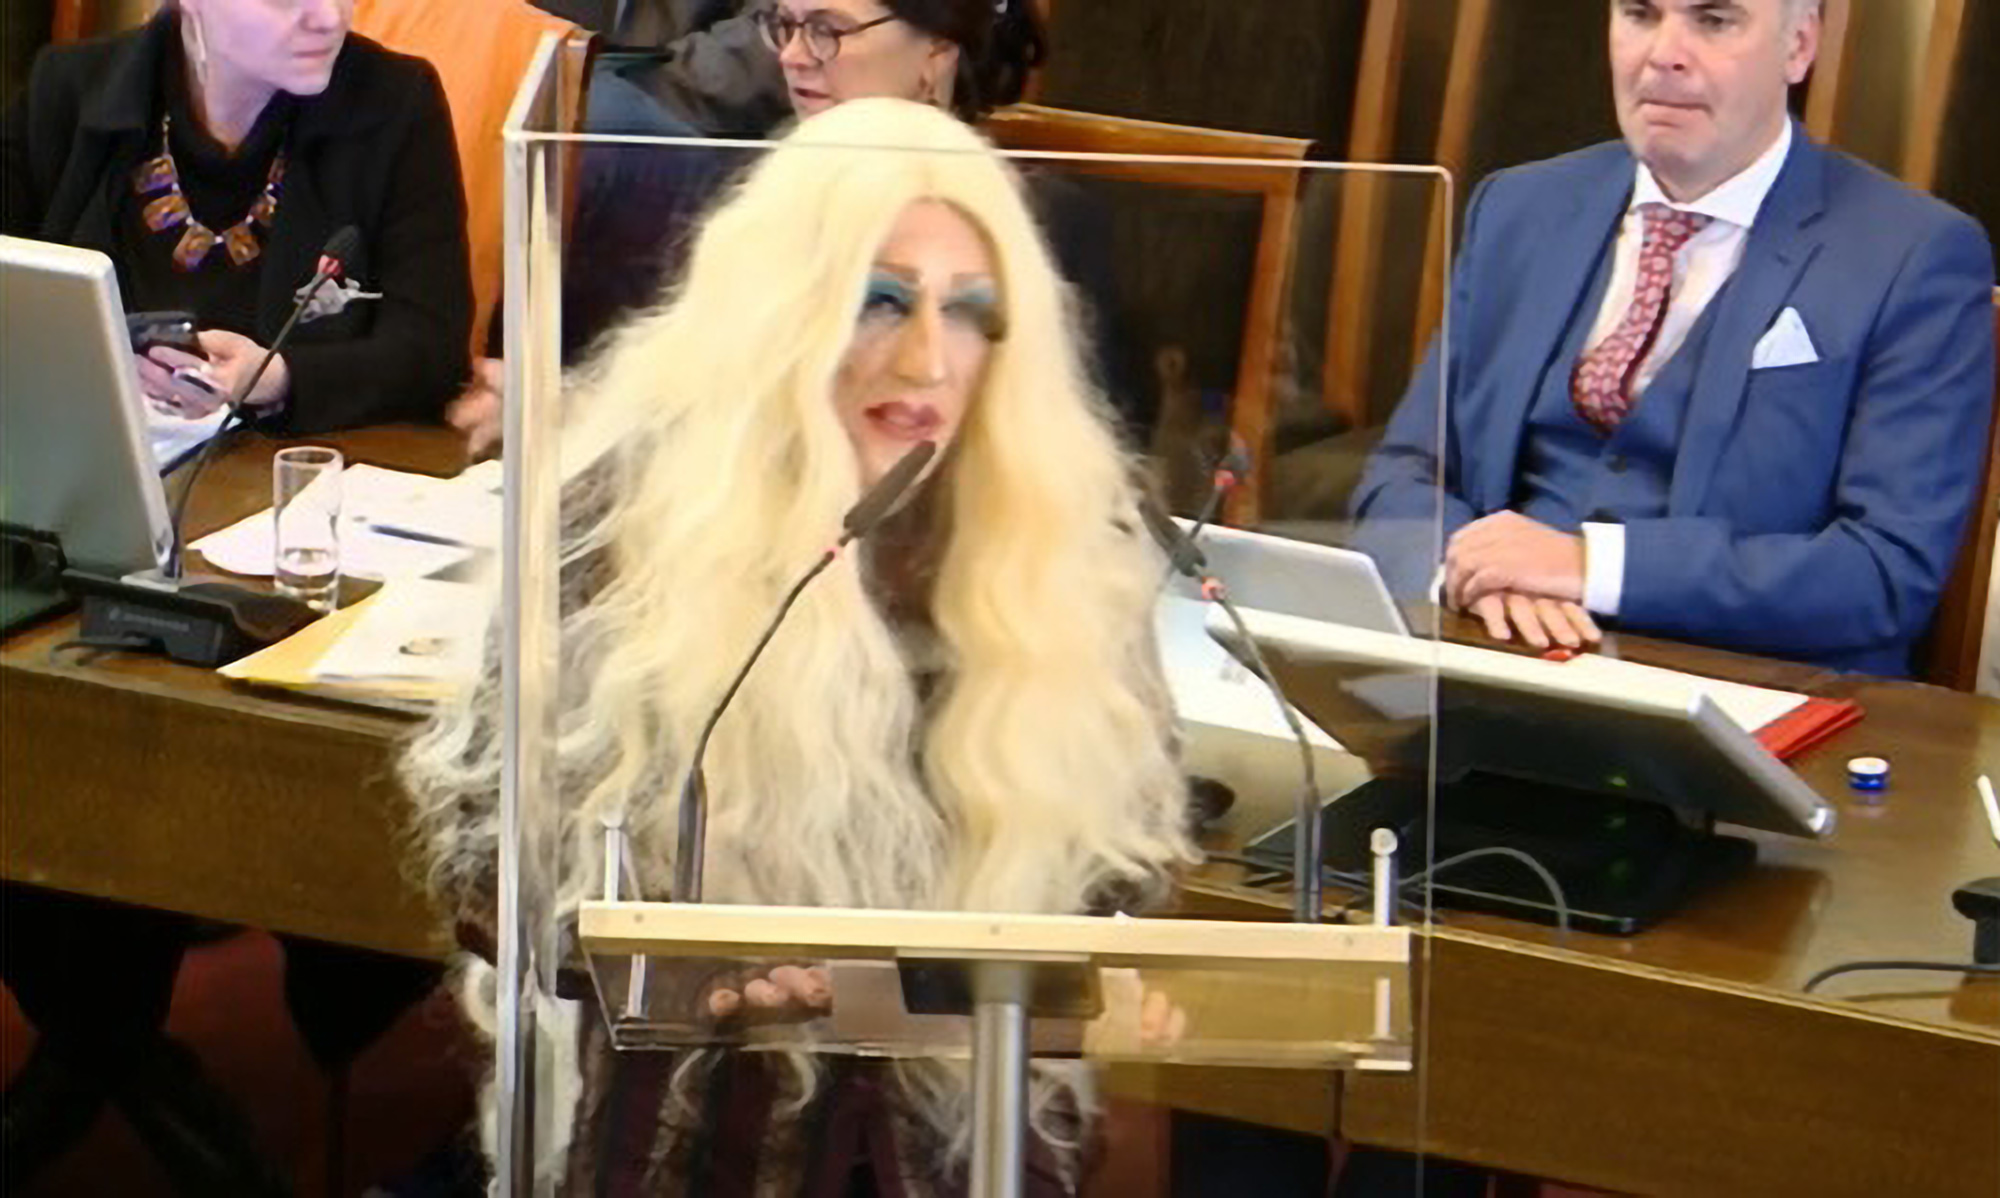 Lefty City Councillor Turns Up To Plenary Session Dressed As Drag Queen